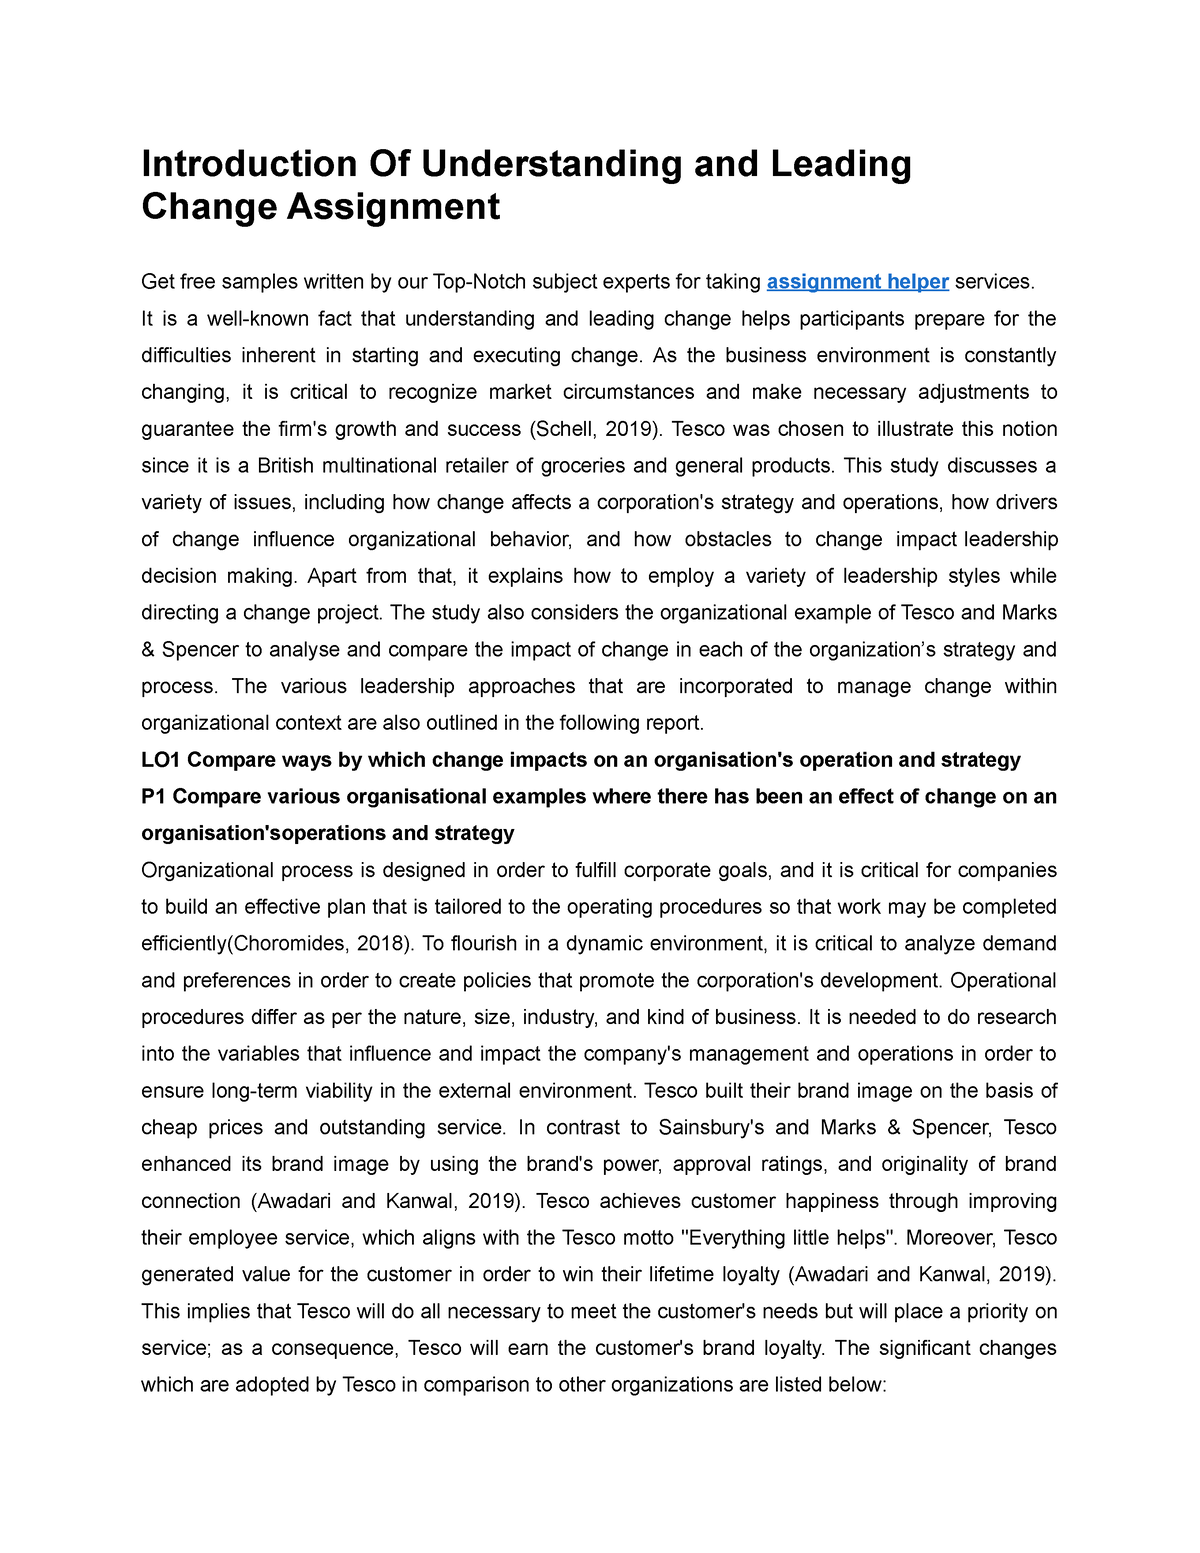 understanding and leading change hnd assignment